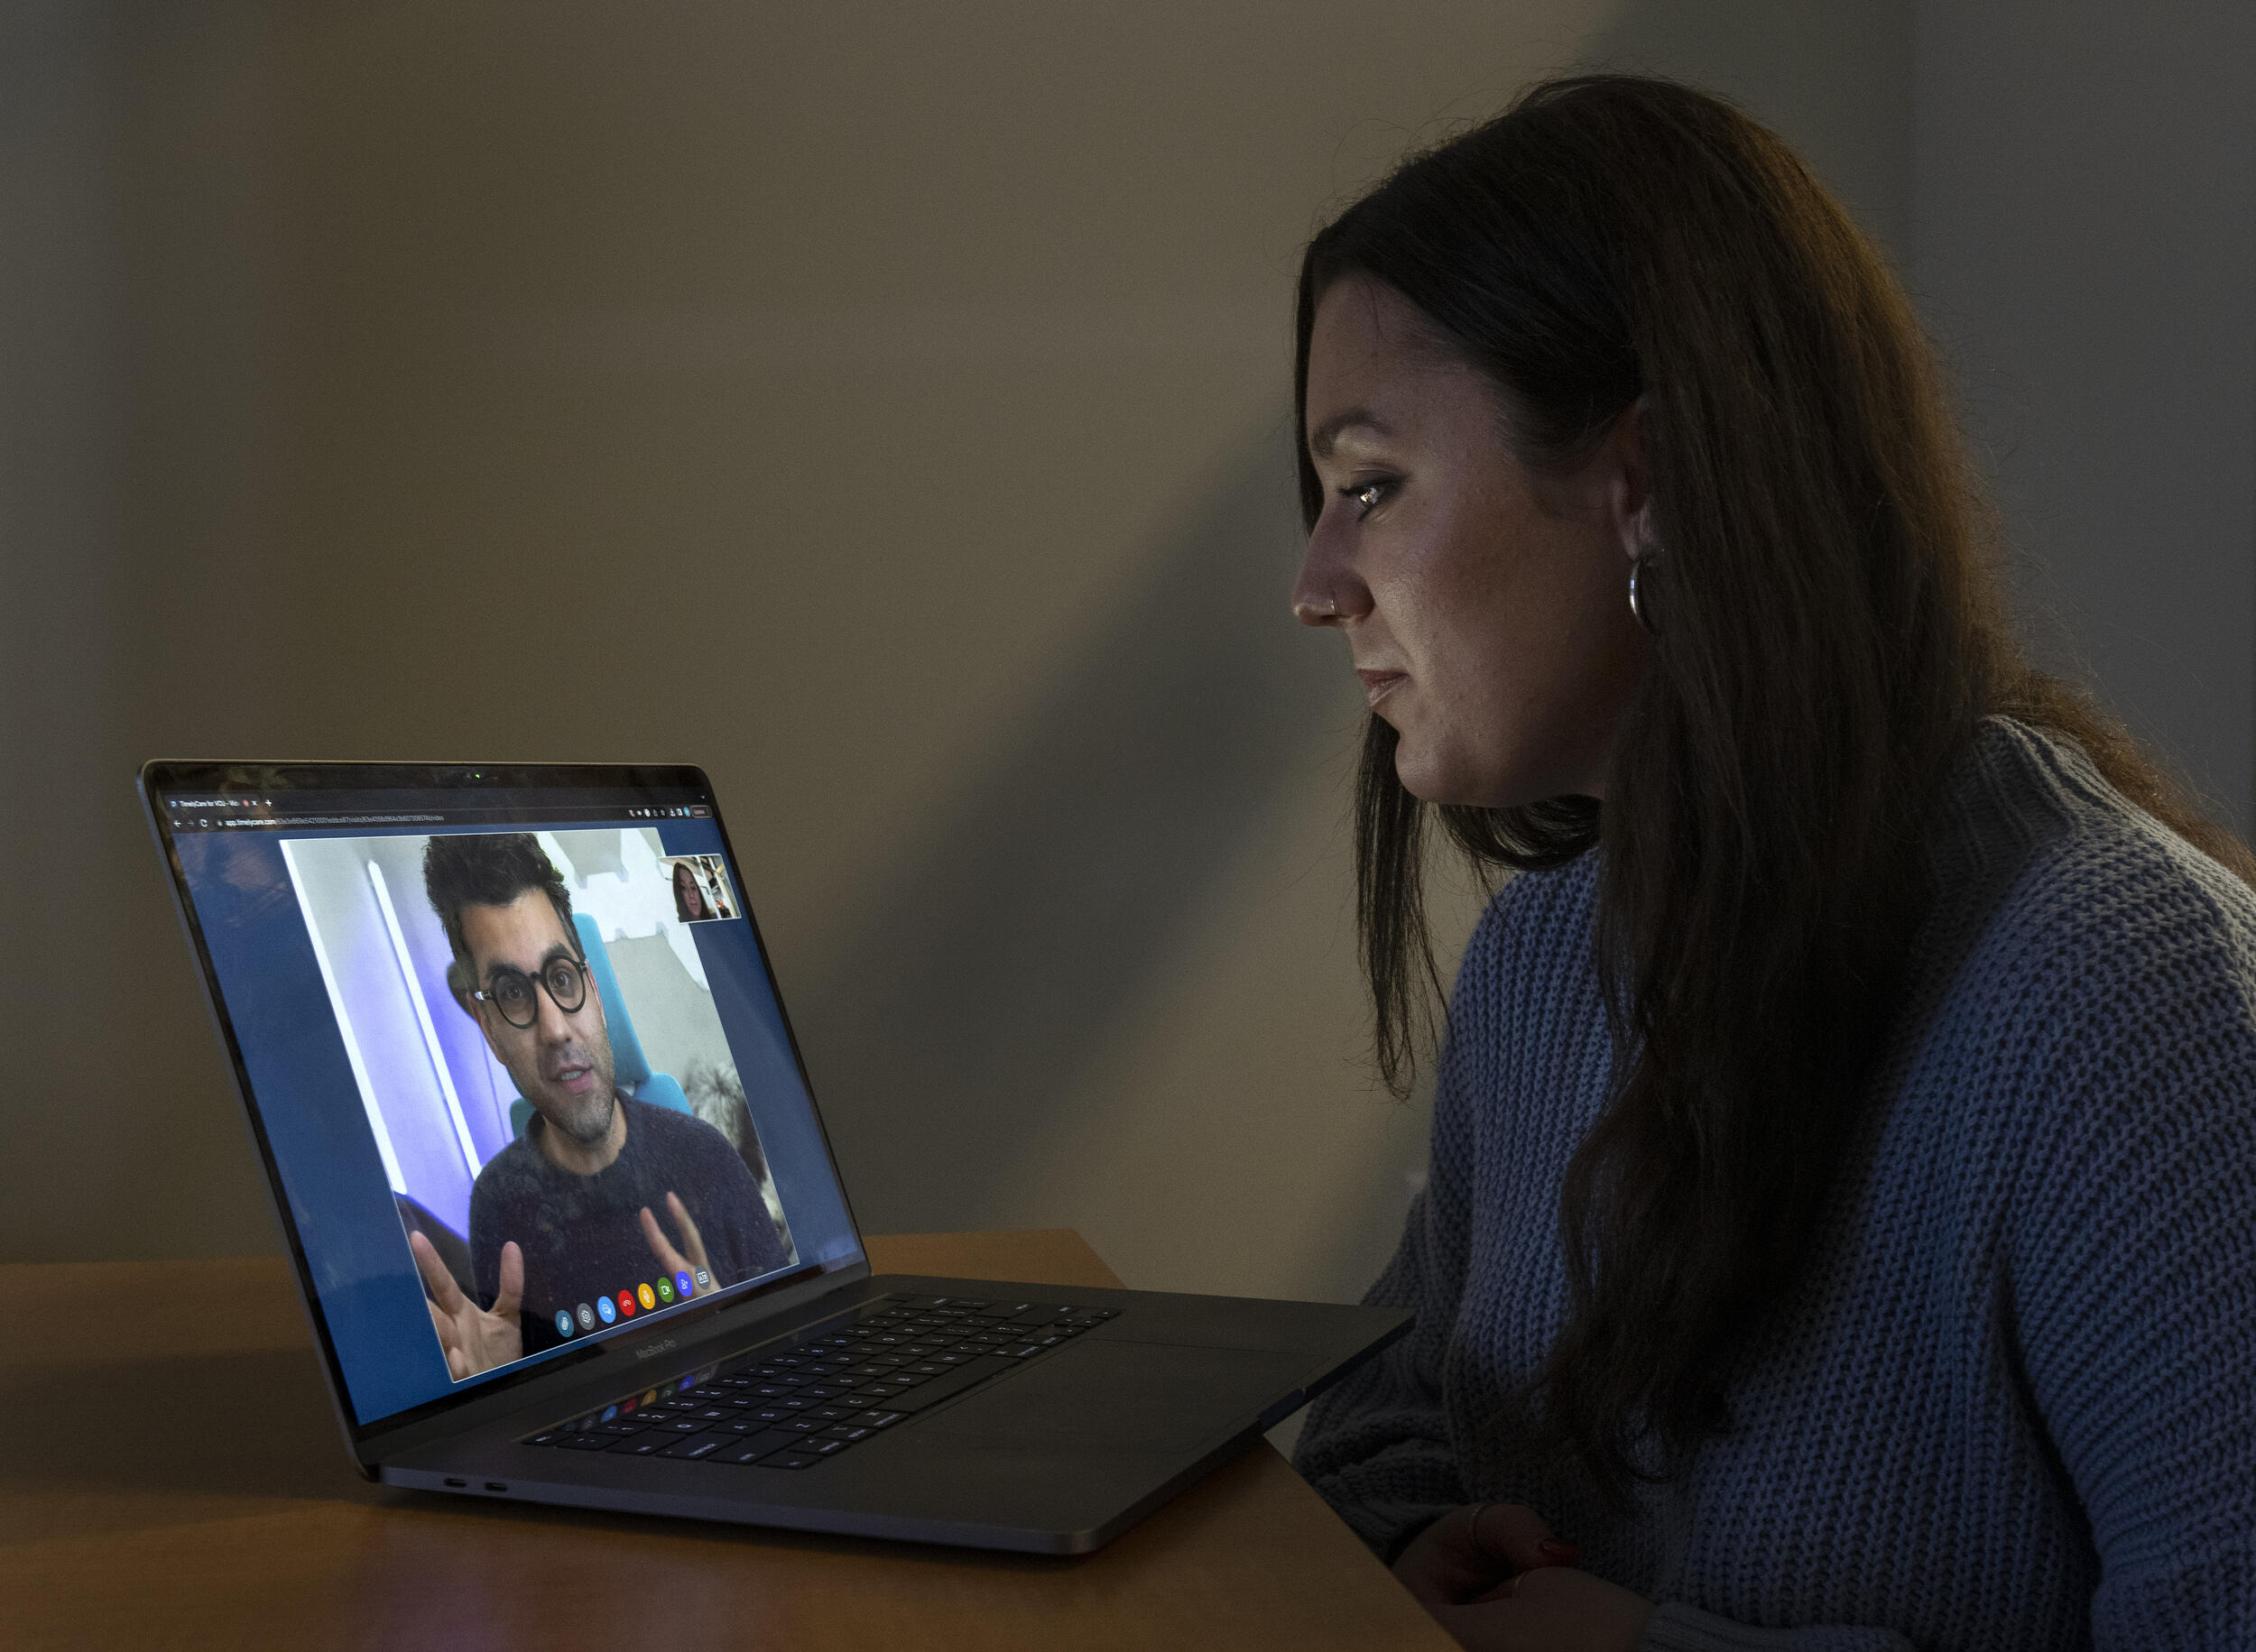 A student looks at a laptop screen, where a mental health provider is speaking.